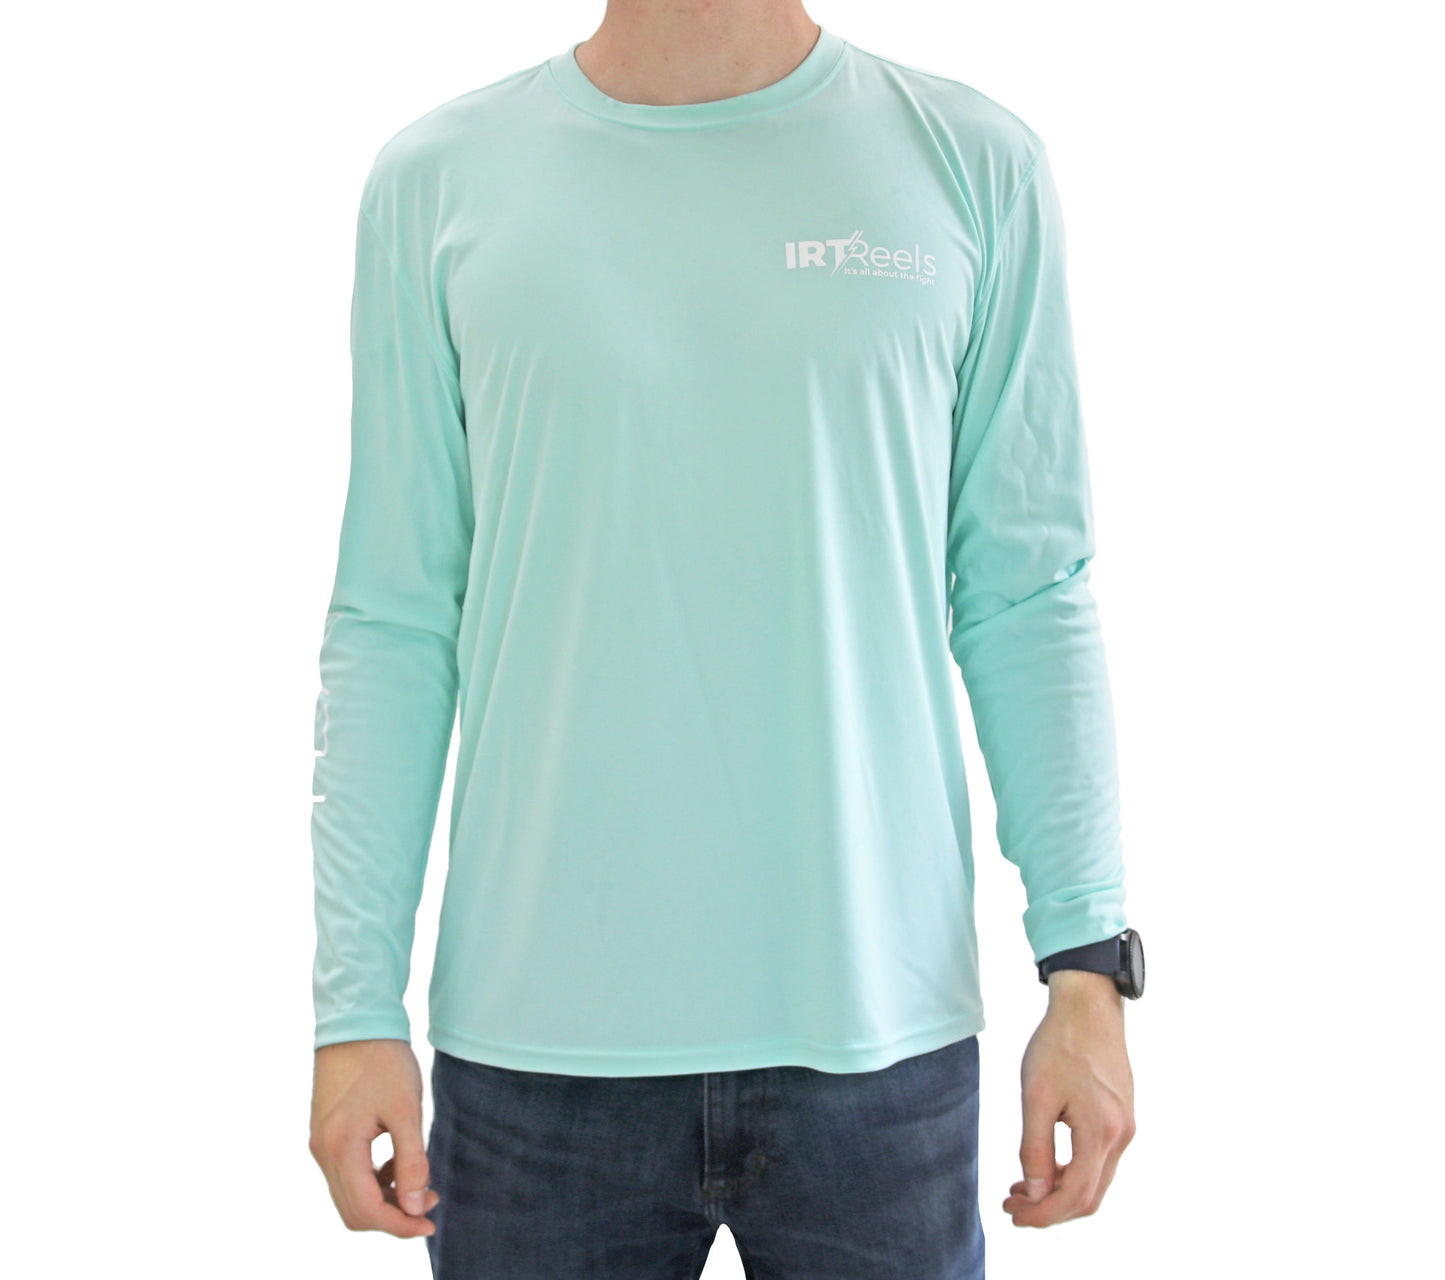 Tails Up Long Sleeve Performance Tee